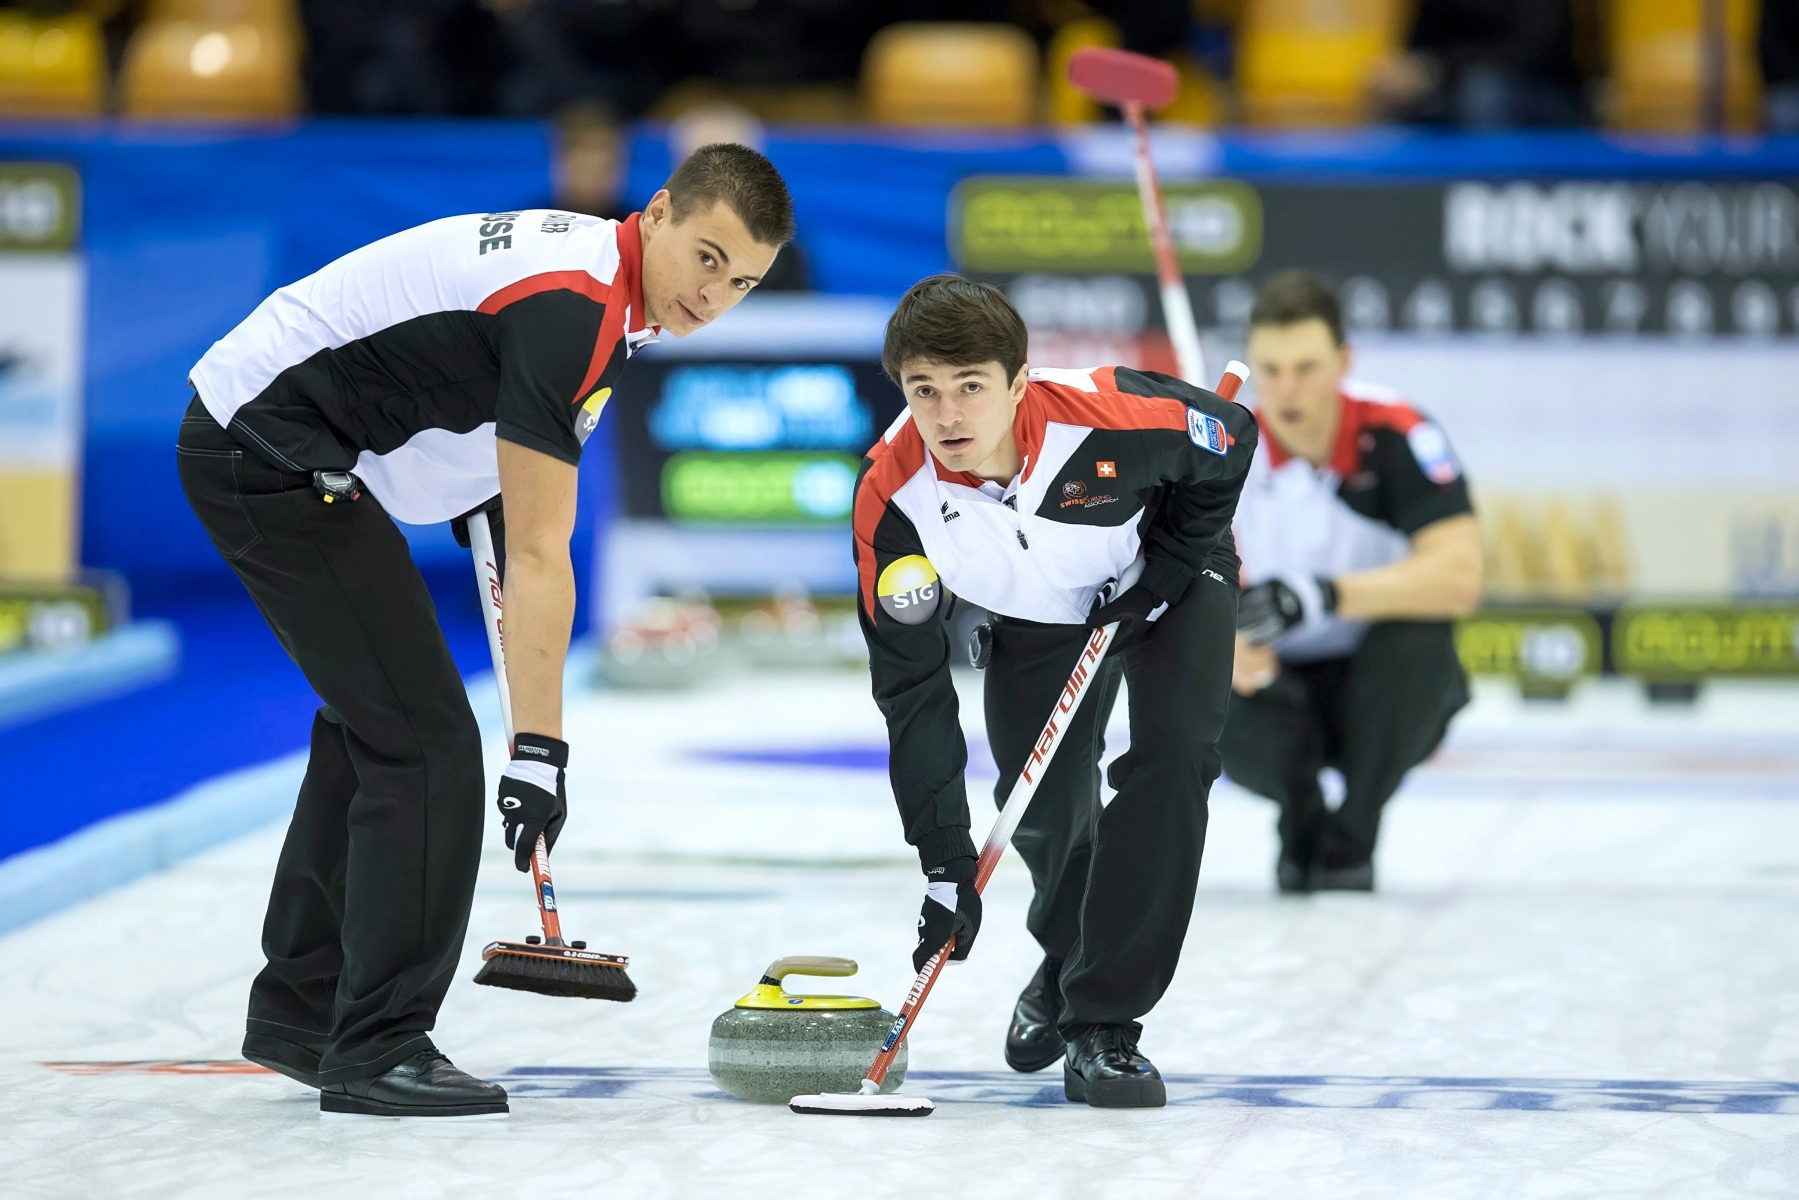 epa05044920 Swiss team in action during the Mens semi final match Switzerland vs Finland at the 2015 European Curling Championships in Esbjerg, Denmark, 27 November 2015.  EPA/NIELS HUSTED DENMARK CURLING EUROPEAN CHAMPIONSHIP